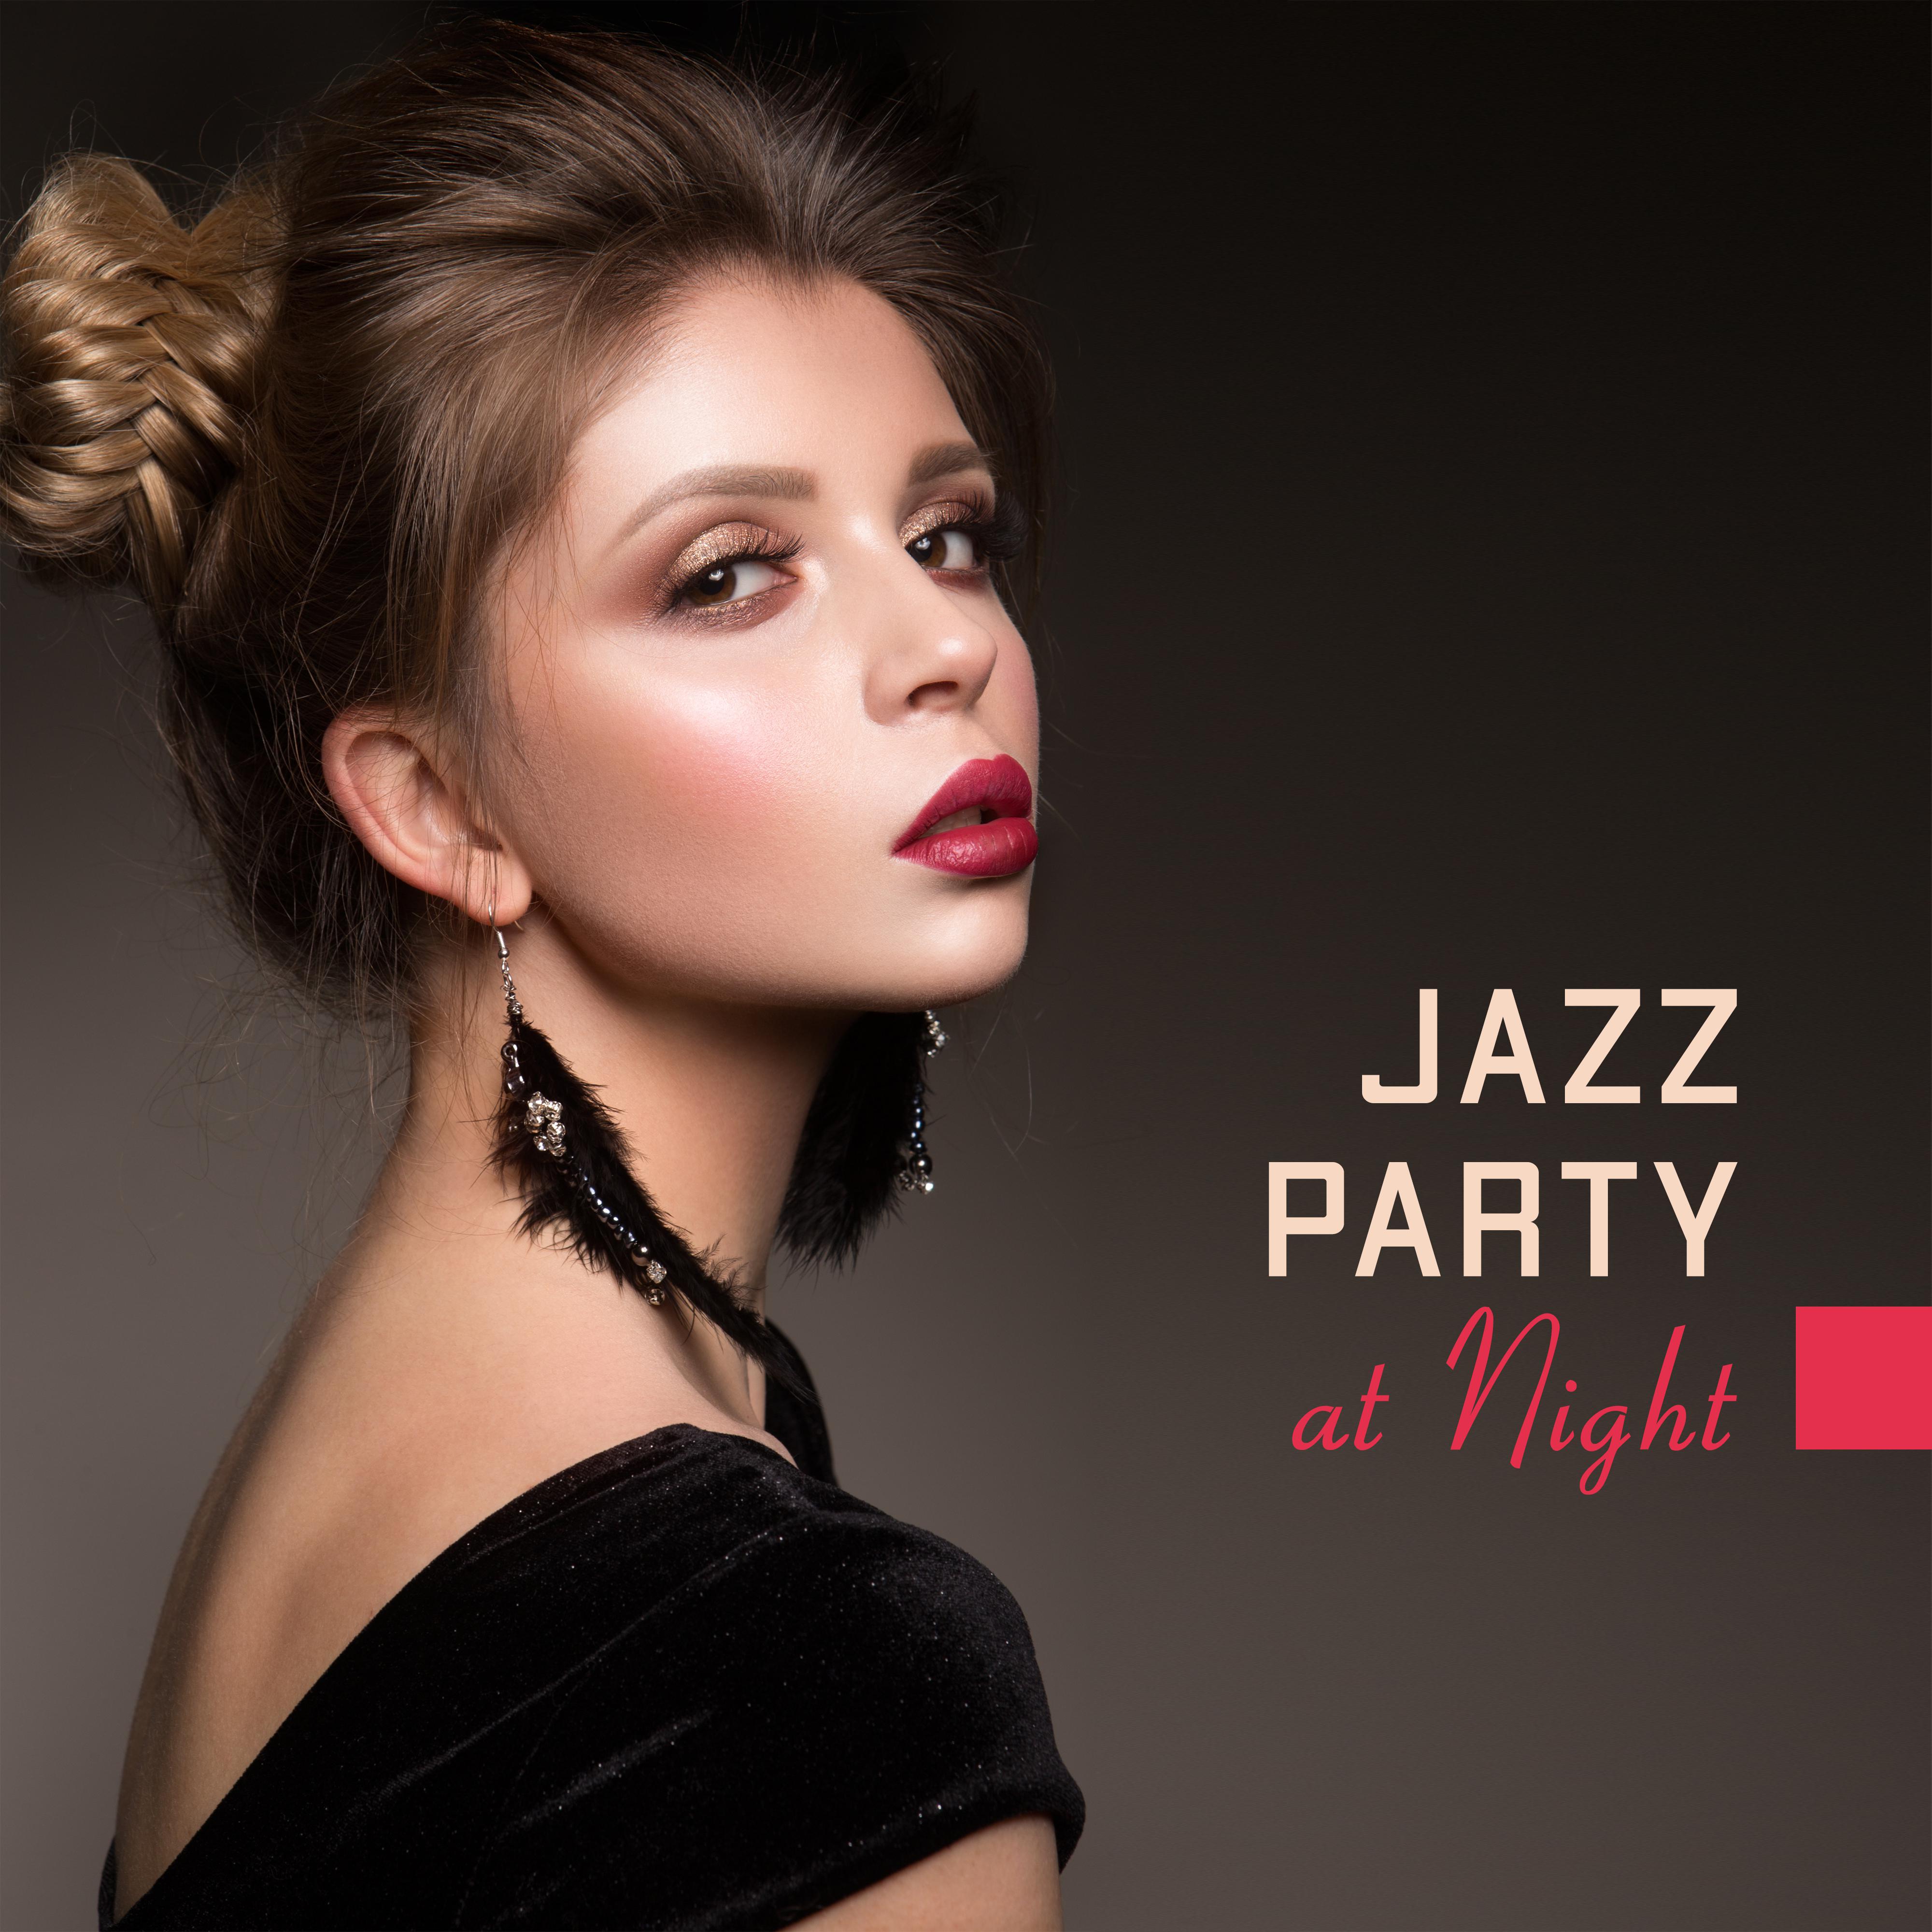 Jazz Party at Night: Smooth Jazz Instrumental 2019 Elegant Party Music Selection, Vintage Fresh Melodies for Dancing with Friends, Relaxing Evening Nice Time Spending